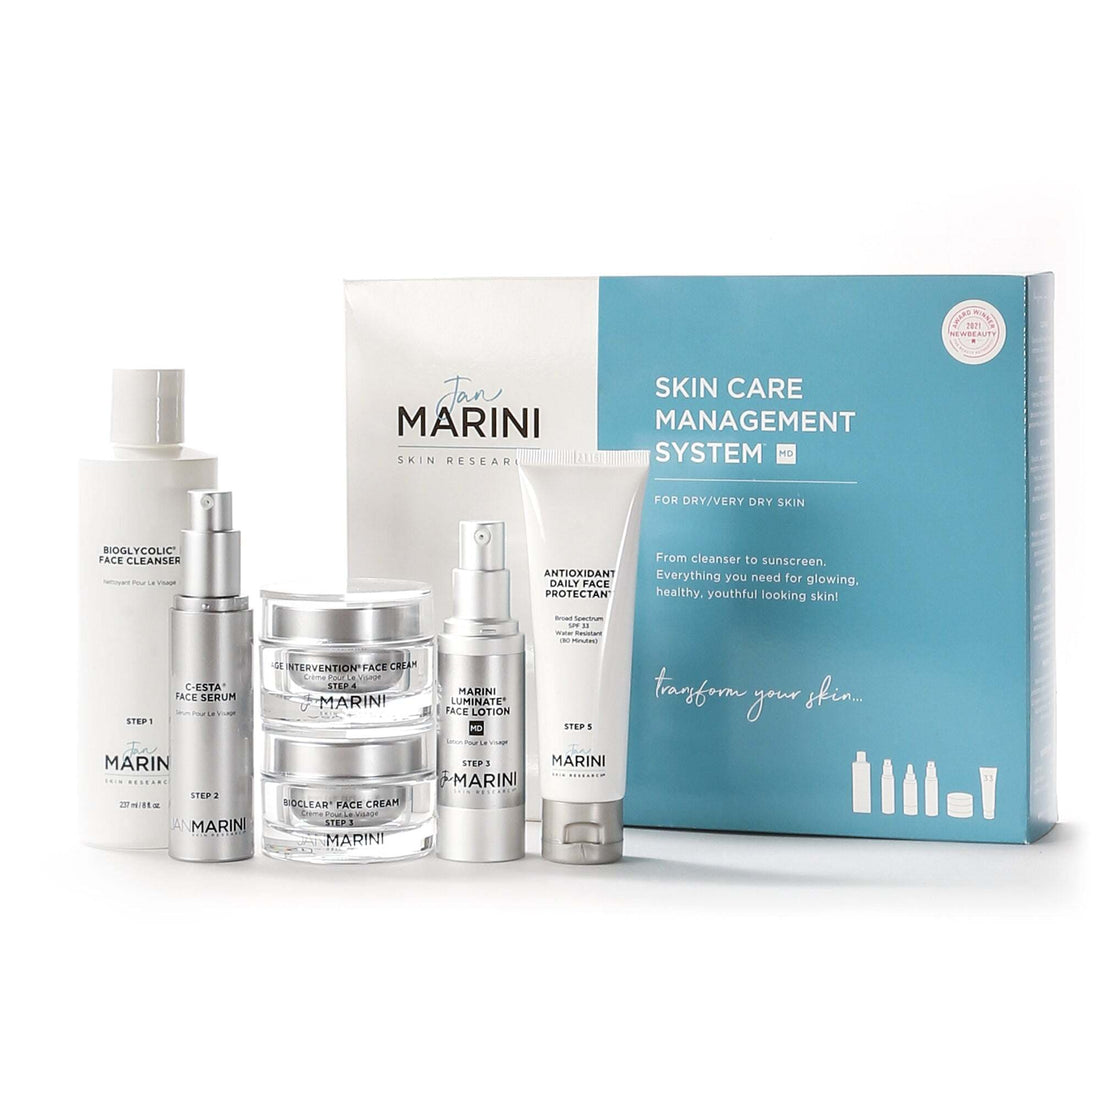 Jan Marini Skin Care Management System MD - Dry/Very Dry Skin with Antioxidant Daily Face Protectant SPF 33